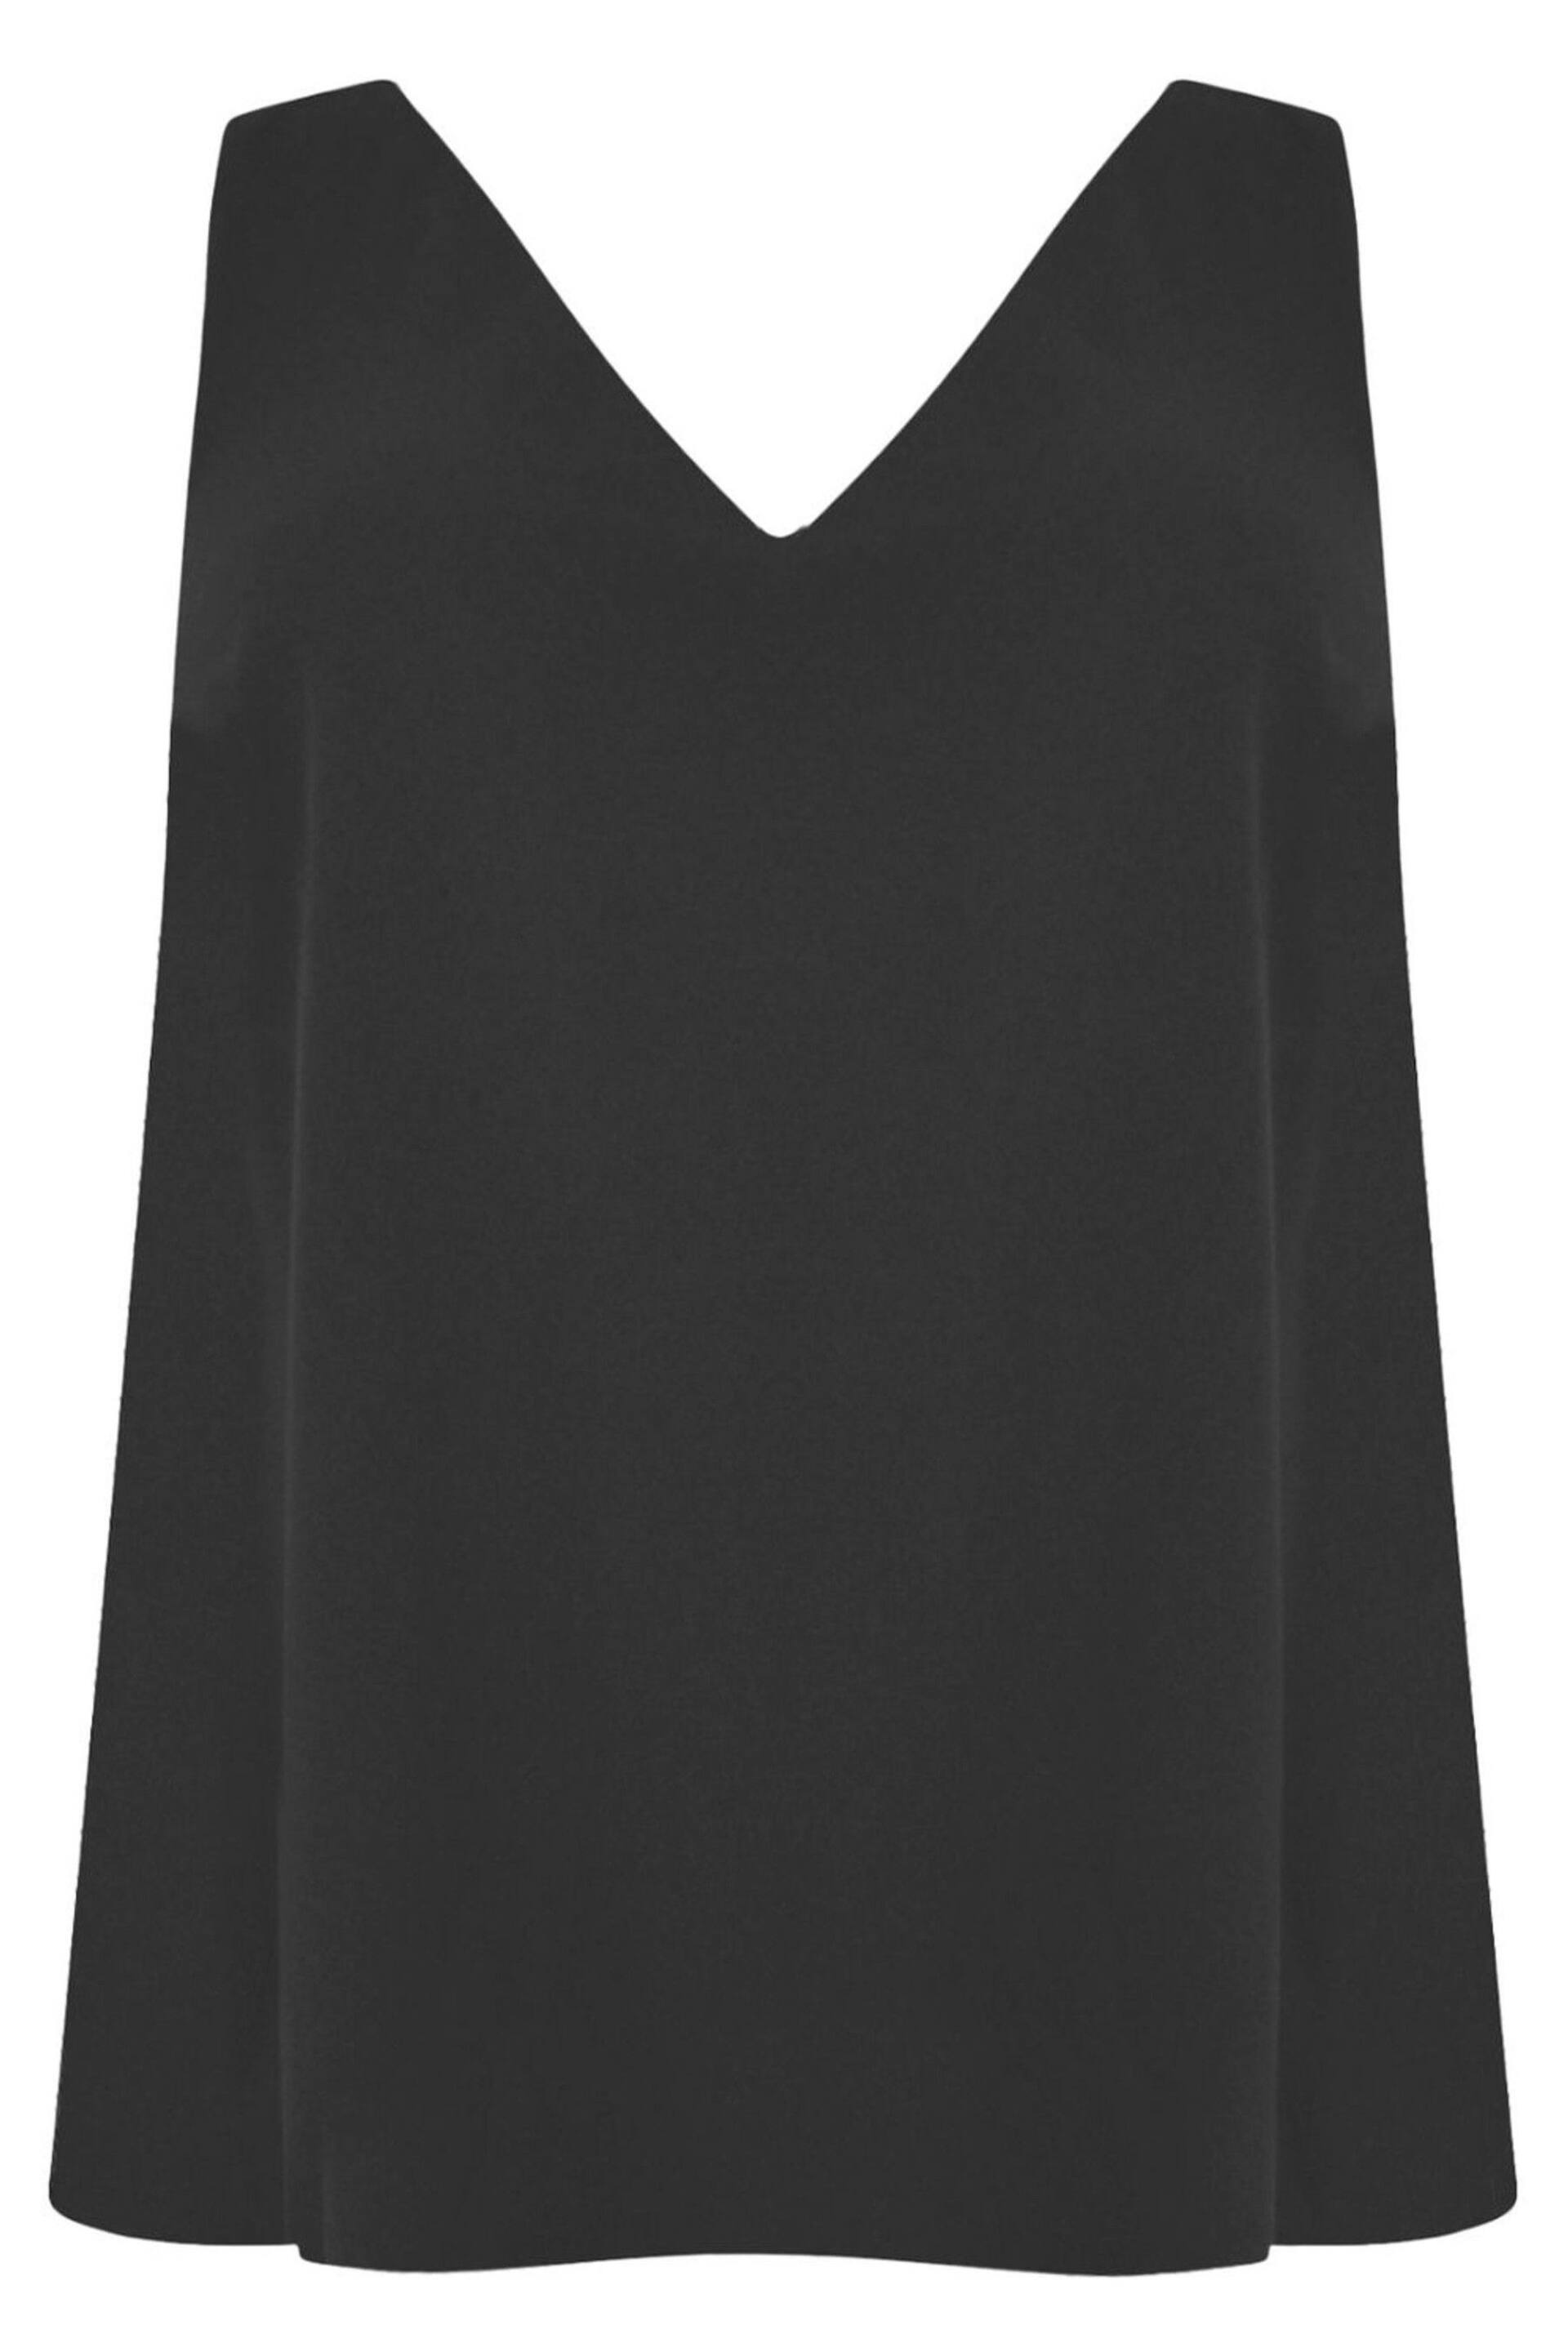 Live Unlimited Curve - Chiffon Layered Swing Vest Black Top - Image 4 of 4